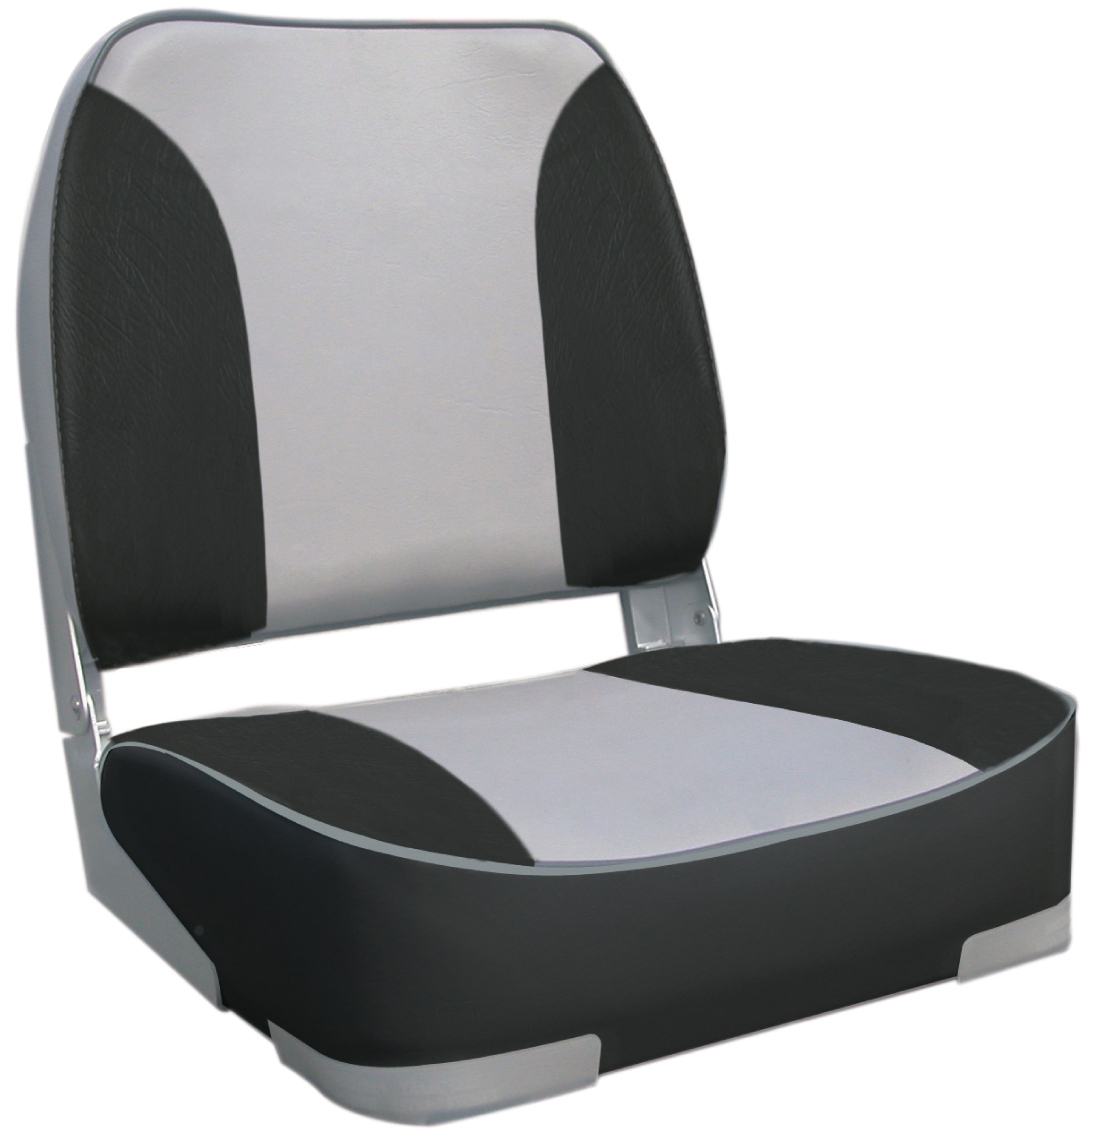 Deluxe Heavy Duty Padded Grey Charcoal Upholstered Folding Boat Seat With Aluminium Hinges Oceansouth